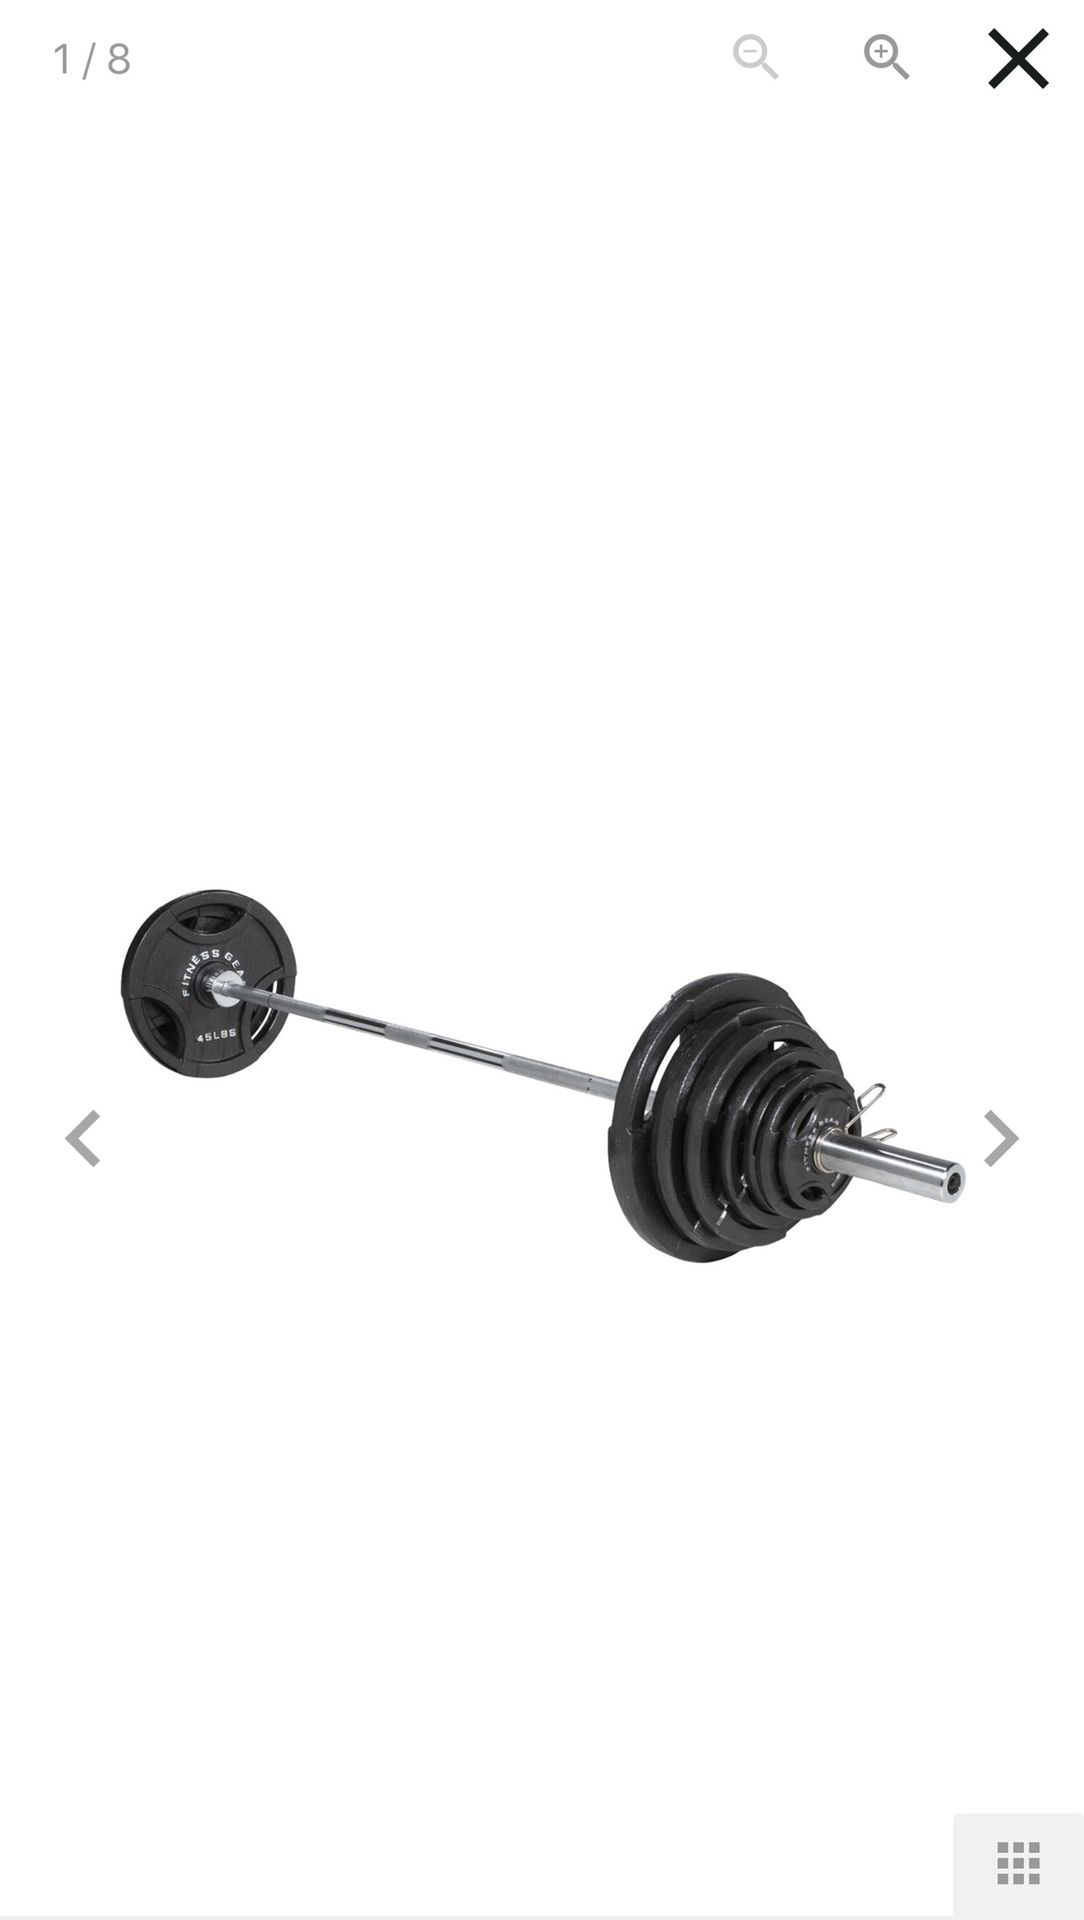 300 lb Olympic weight set